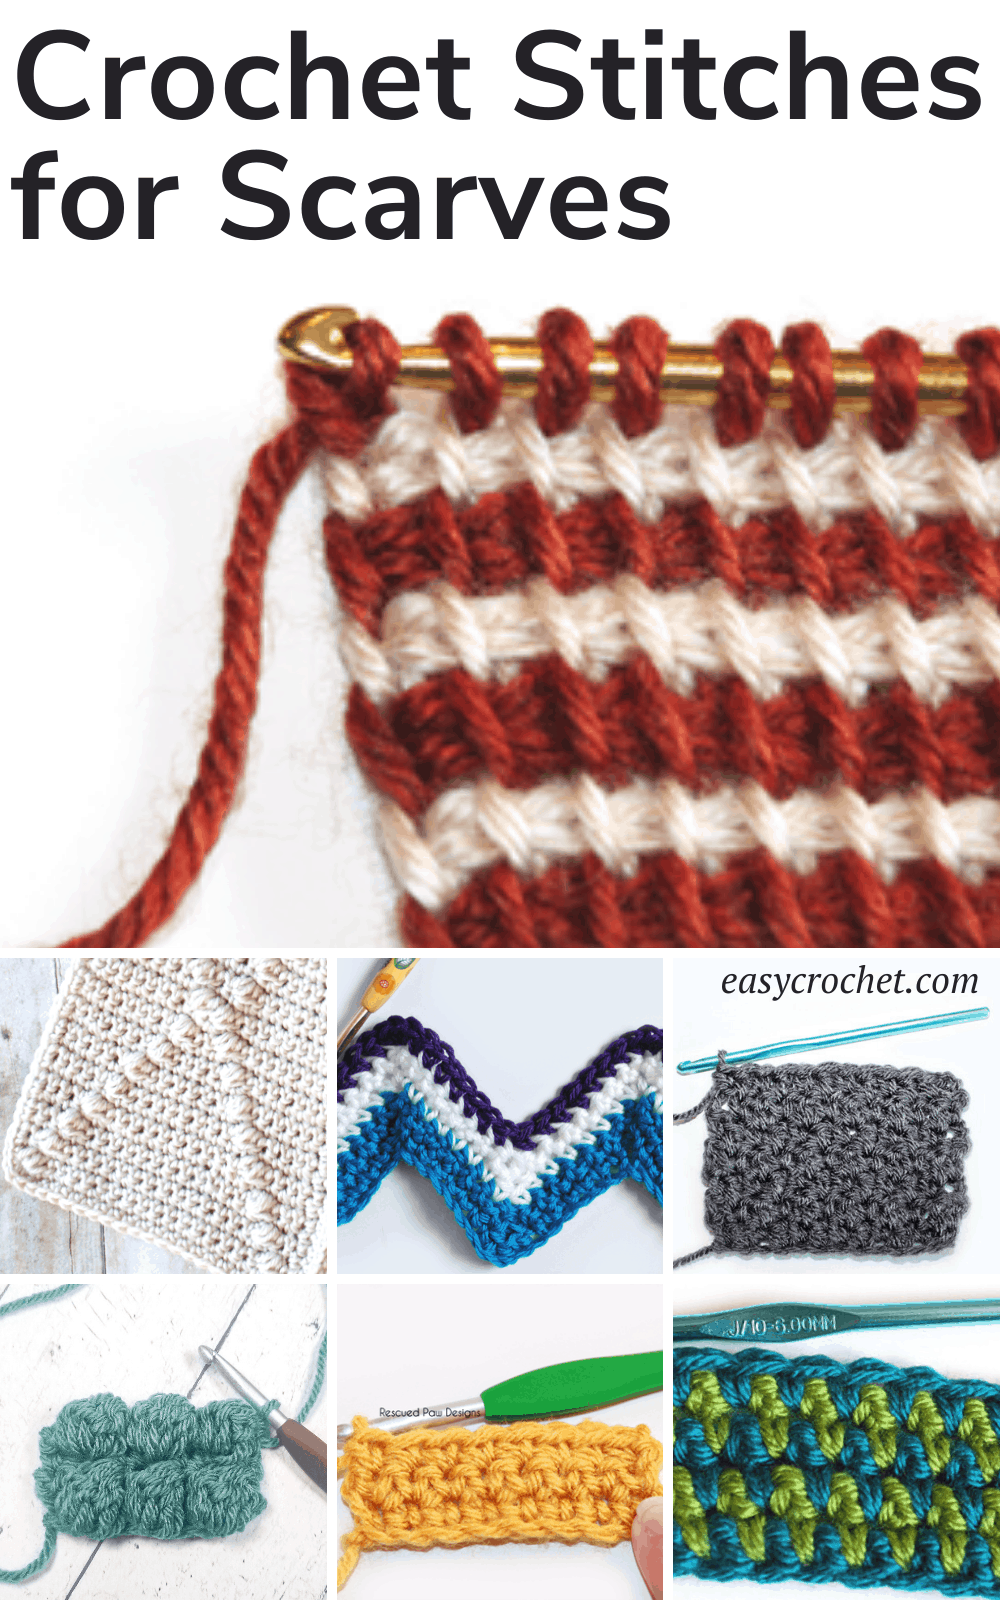 Take a look at these 7 different crochet stitches for scarves that are all easy to learn! Use one or all seven to create your next crochet scarf pattern! via @easycrochetcom